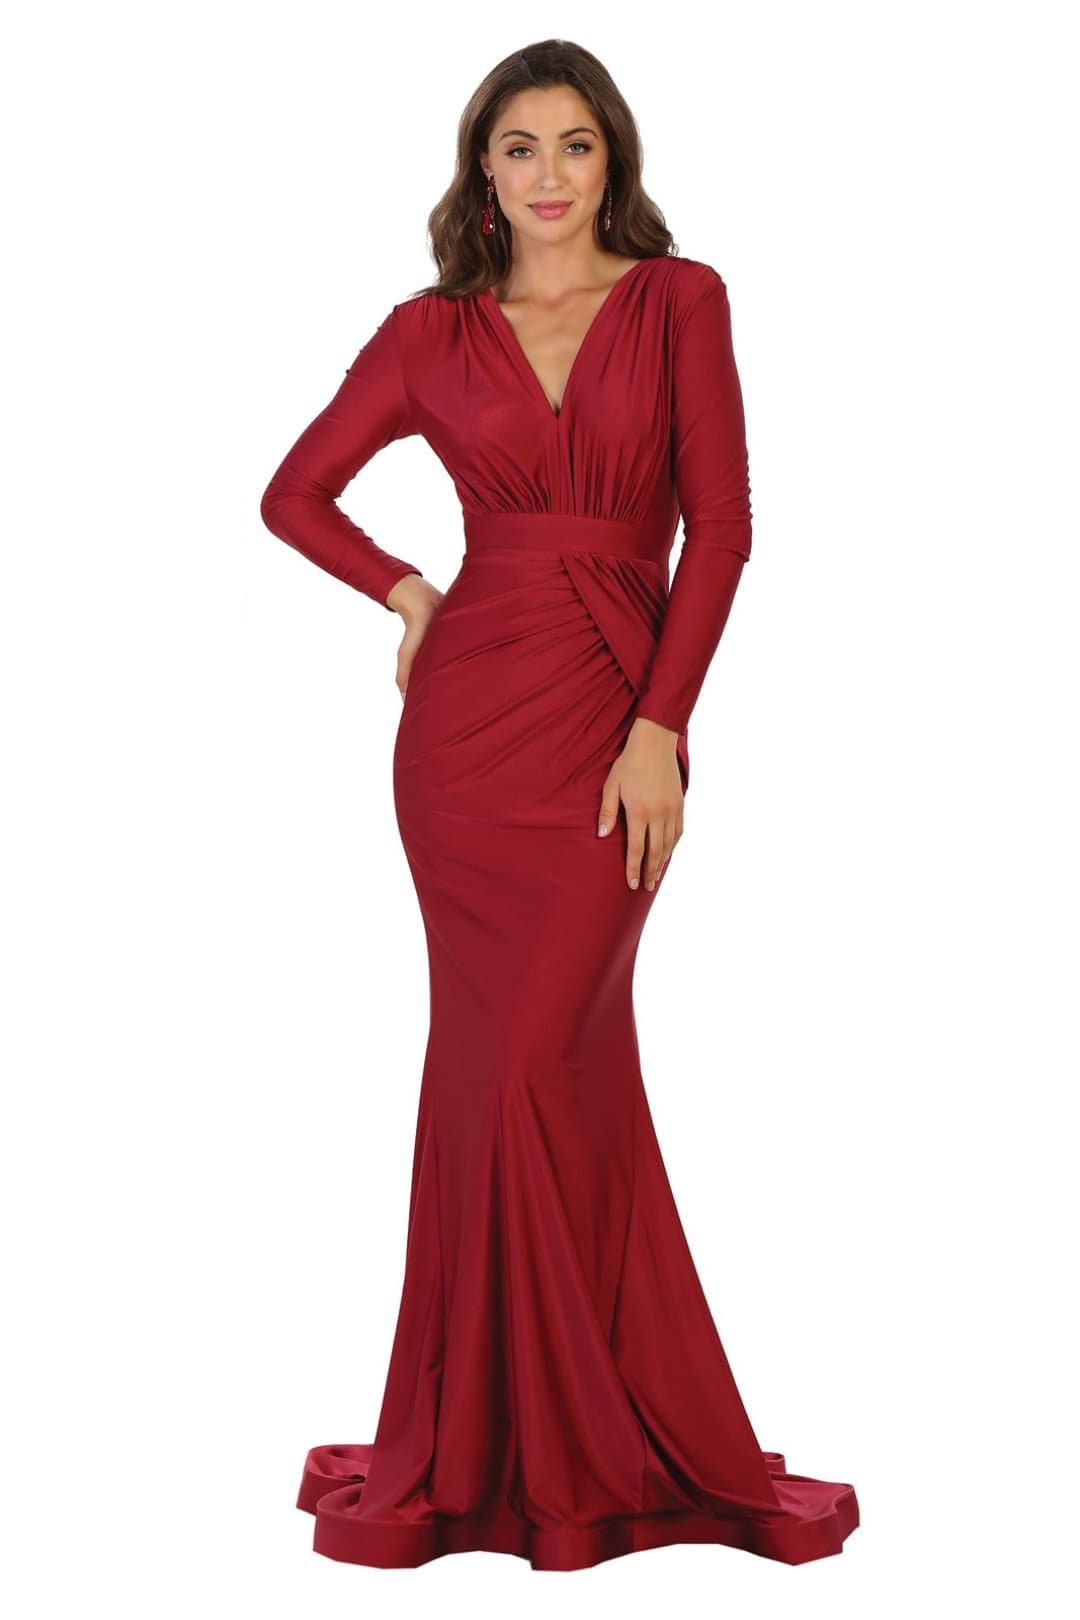 20 Places to Sell Used Prom Dresses for Cash! - MoneyPantry